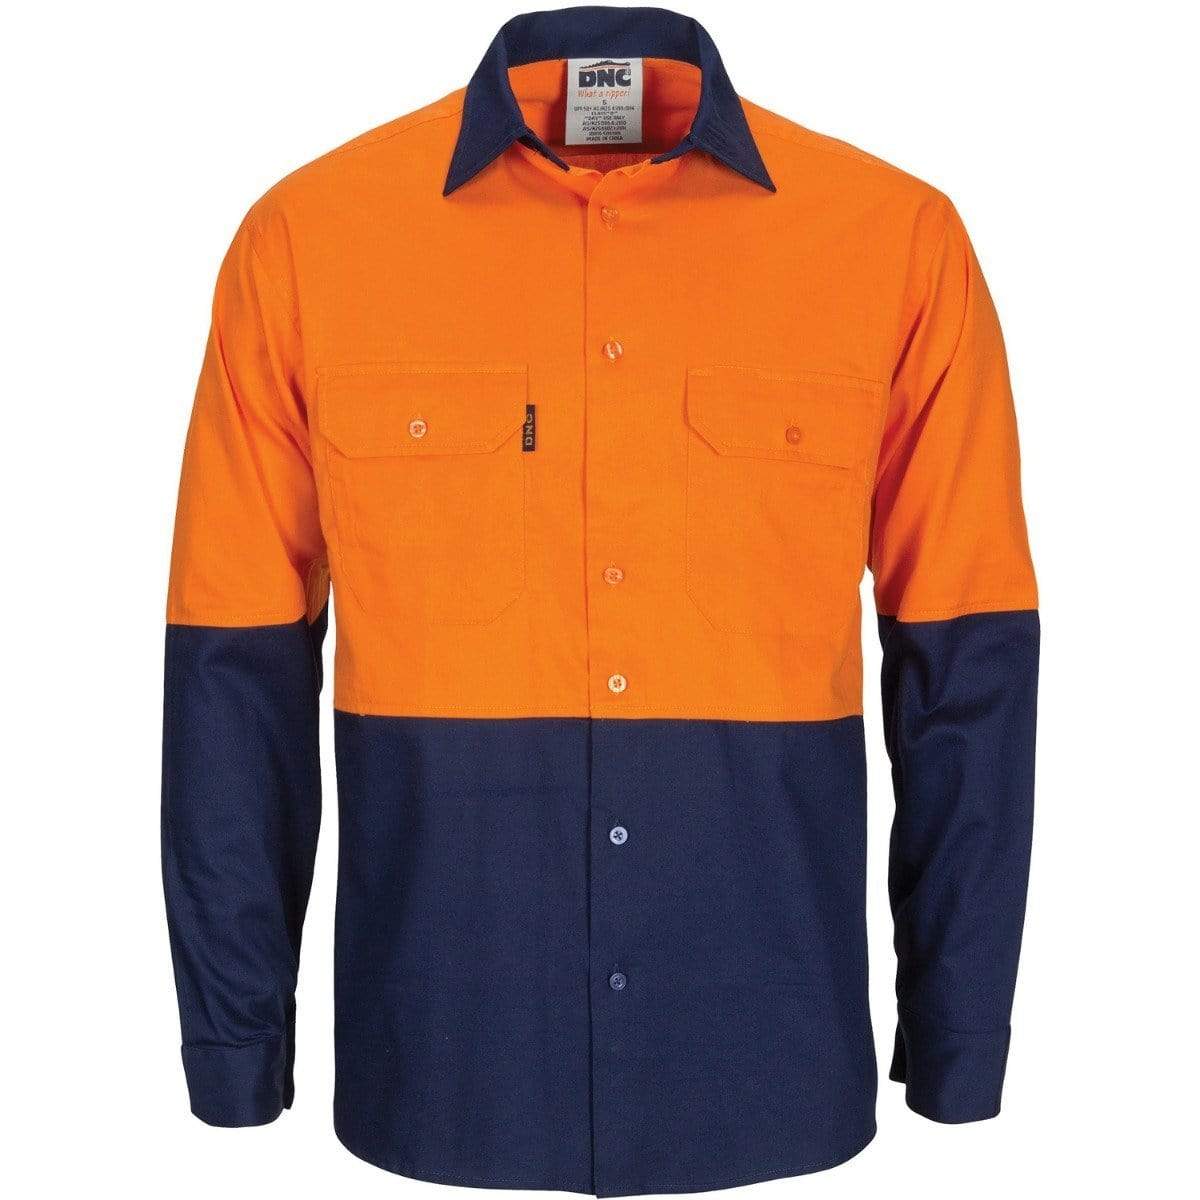 Dnc Workwear Hi-vis R/w Cool-breeze T2 Vertical Vented Long Sleeve Cotton Shirt With Gusset Sleeves - 3781 Work Wear DNC Workwear Orange/Navy XS 